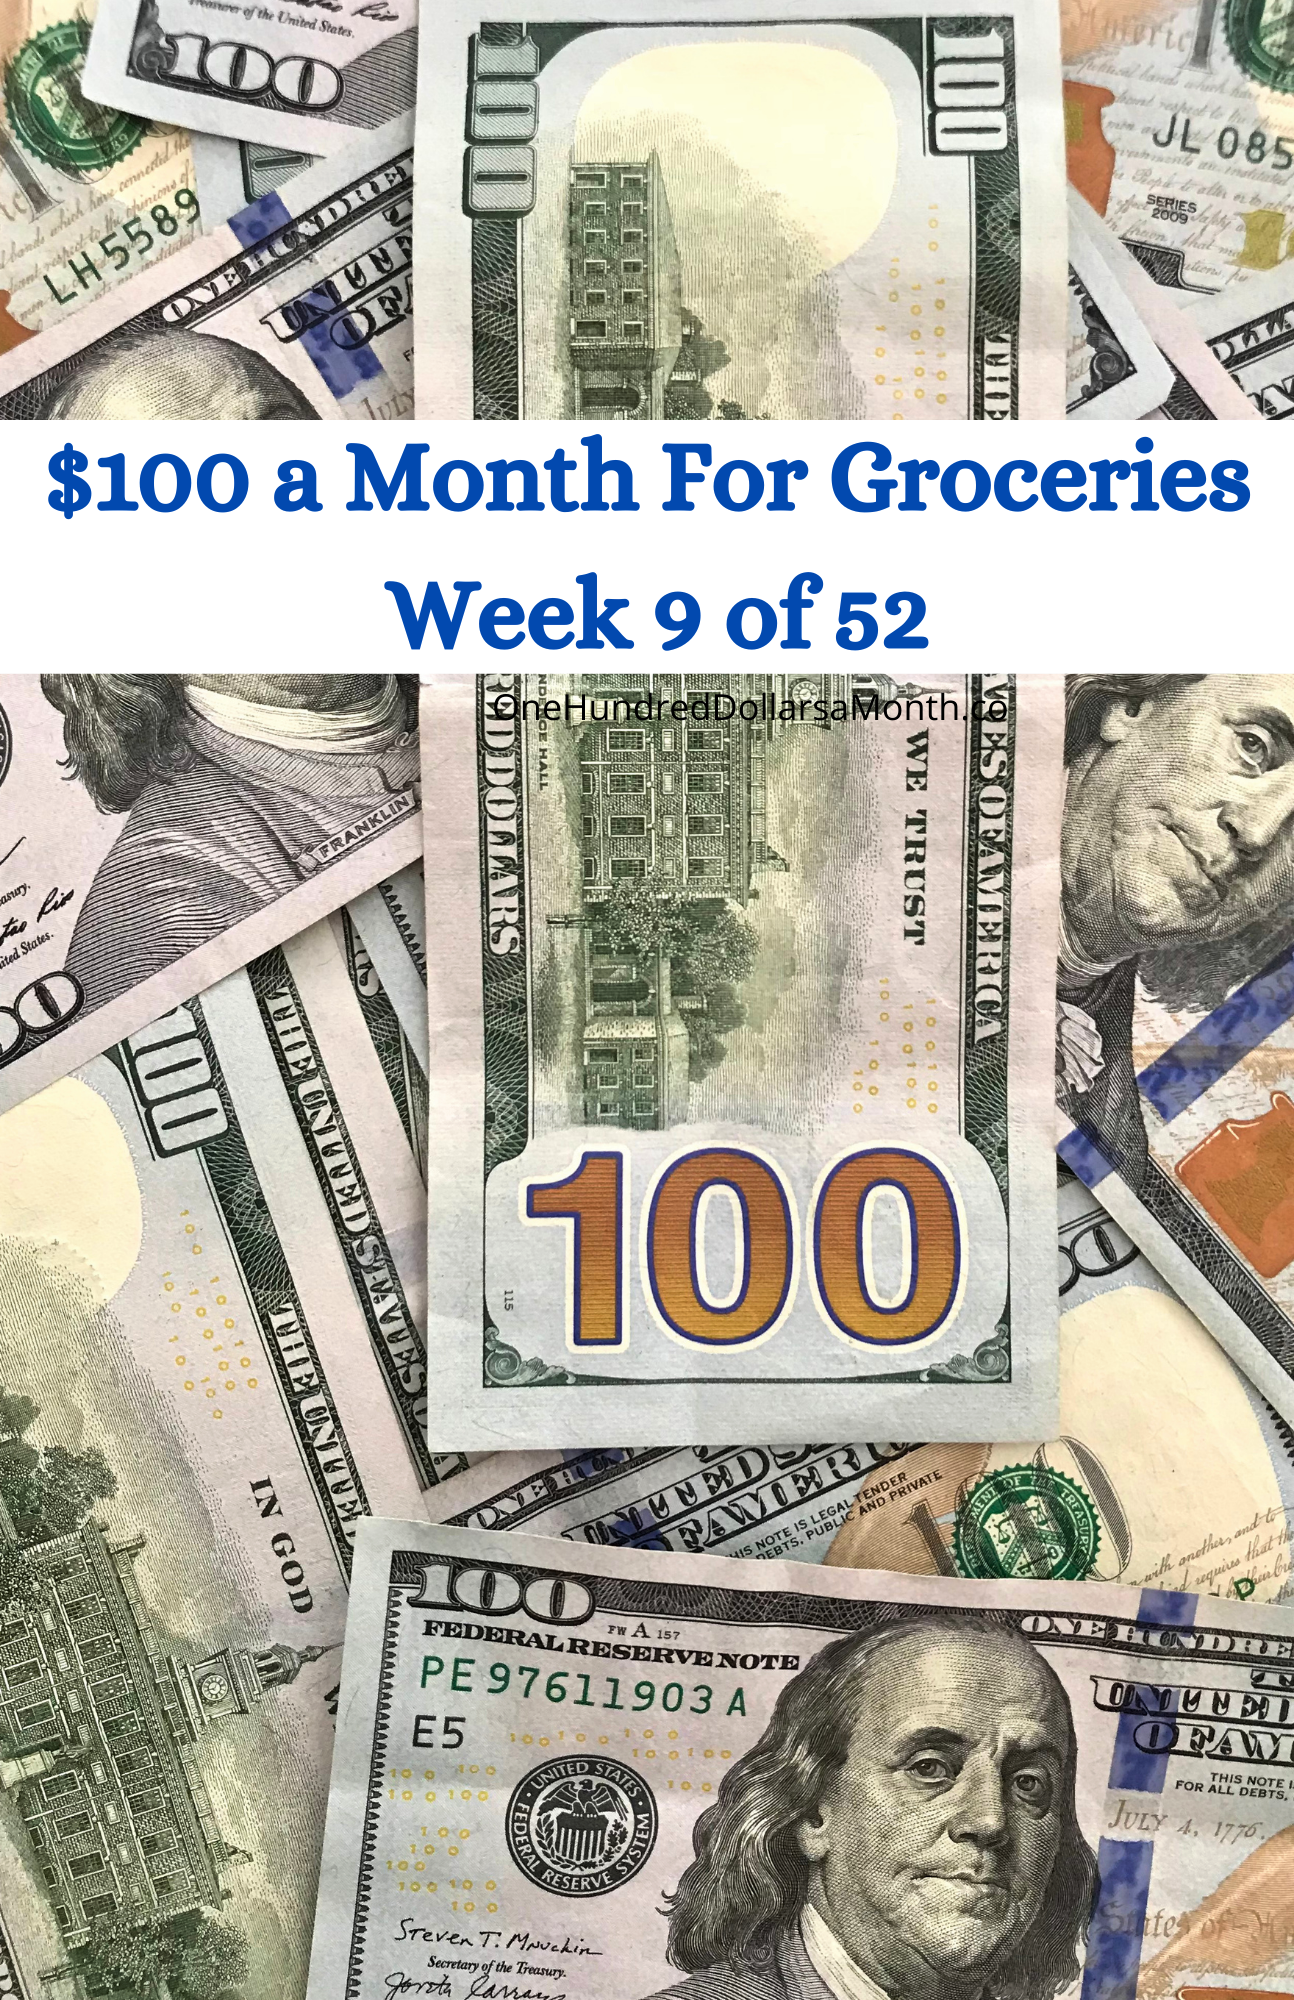 $100 a Month For Groceries – Week 9 of 52